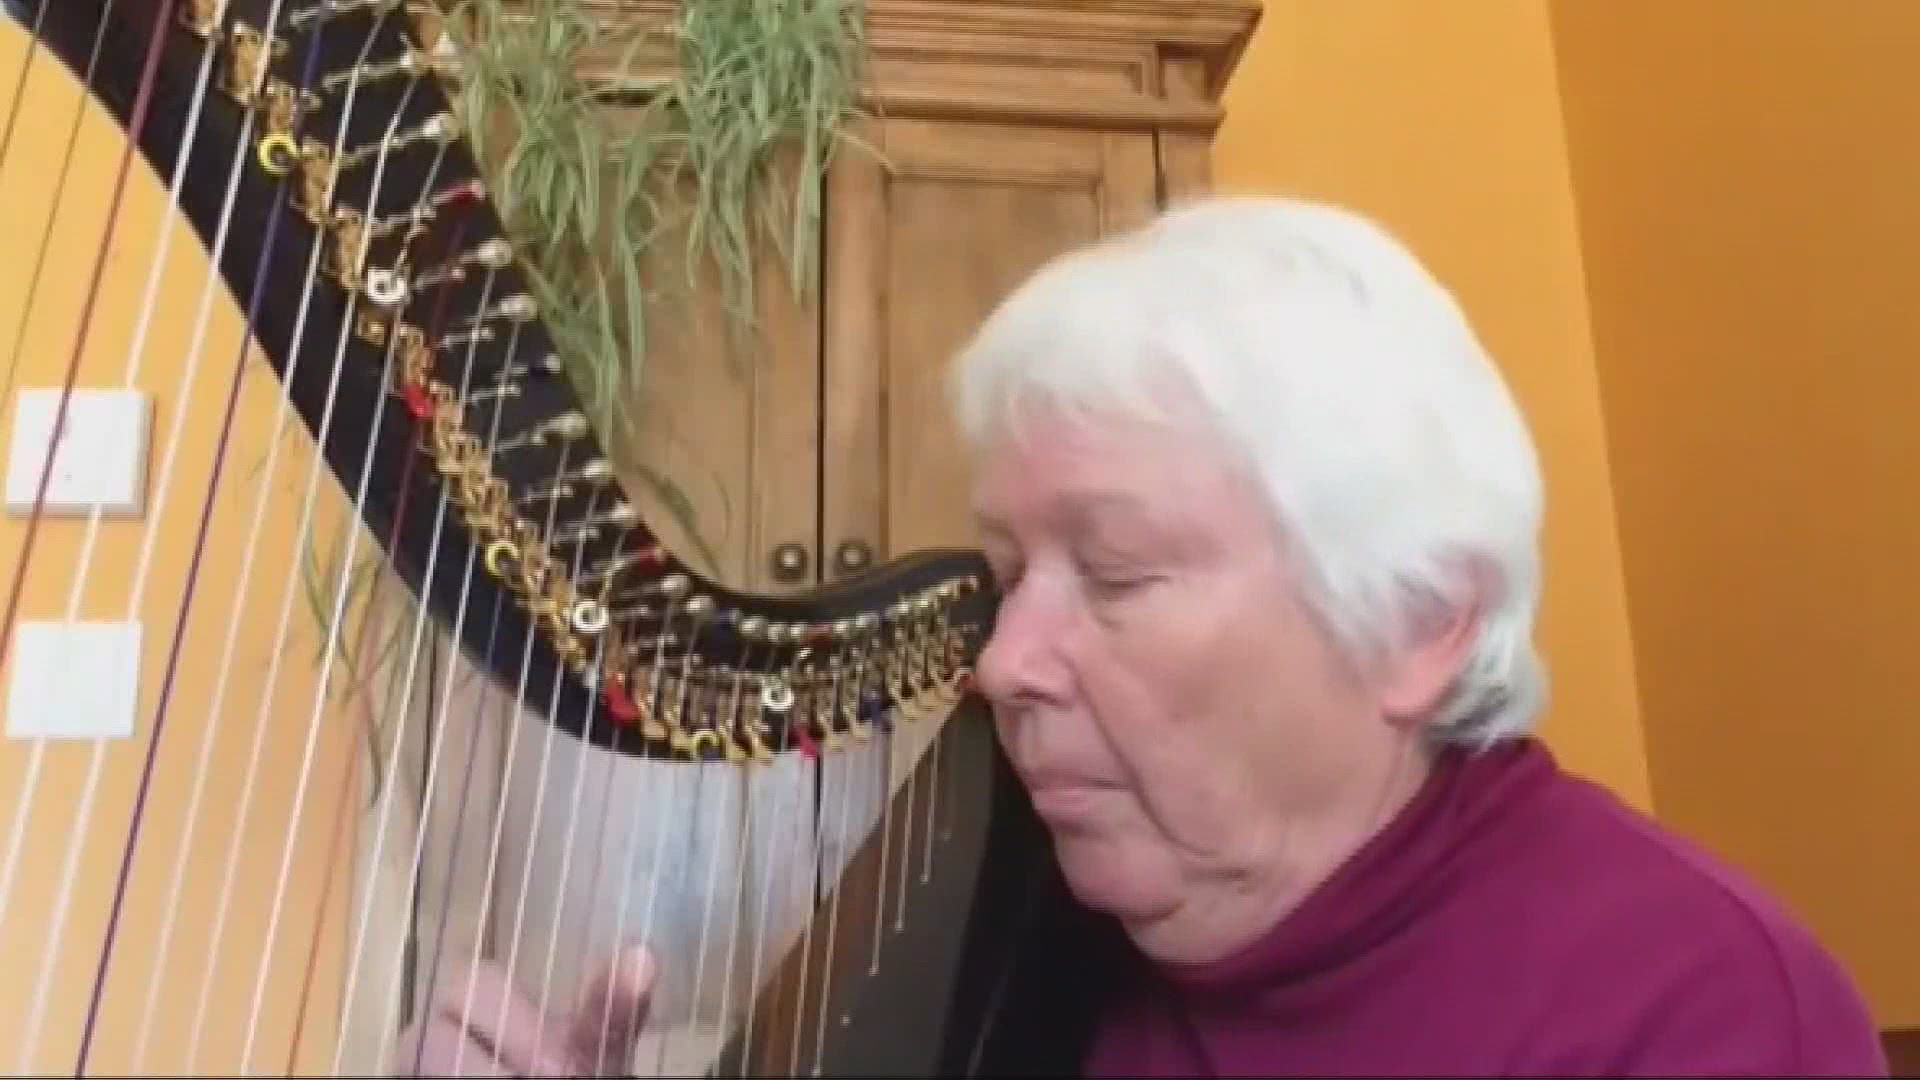 When she's not playing the harp, she's fighting hunger